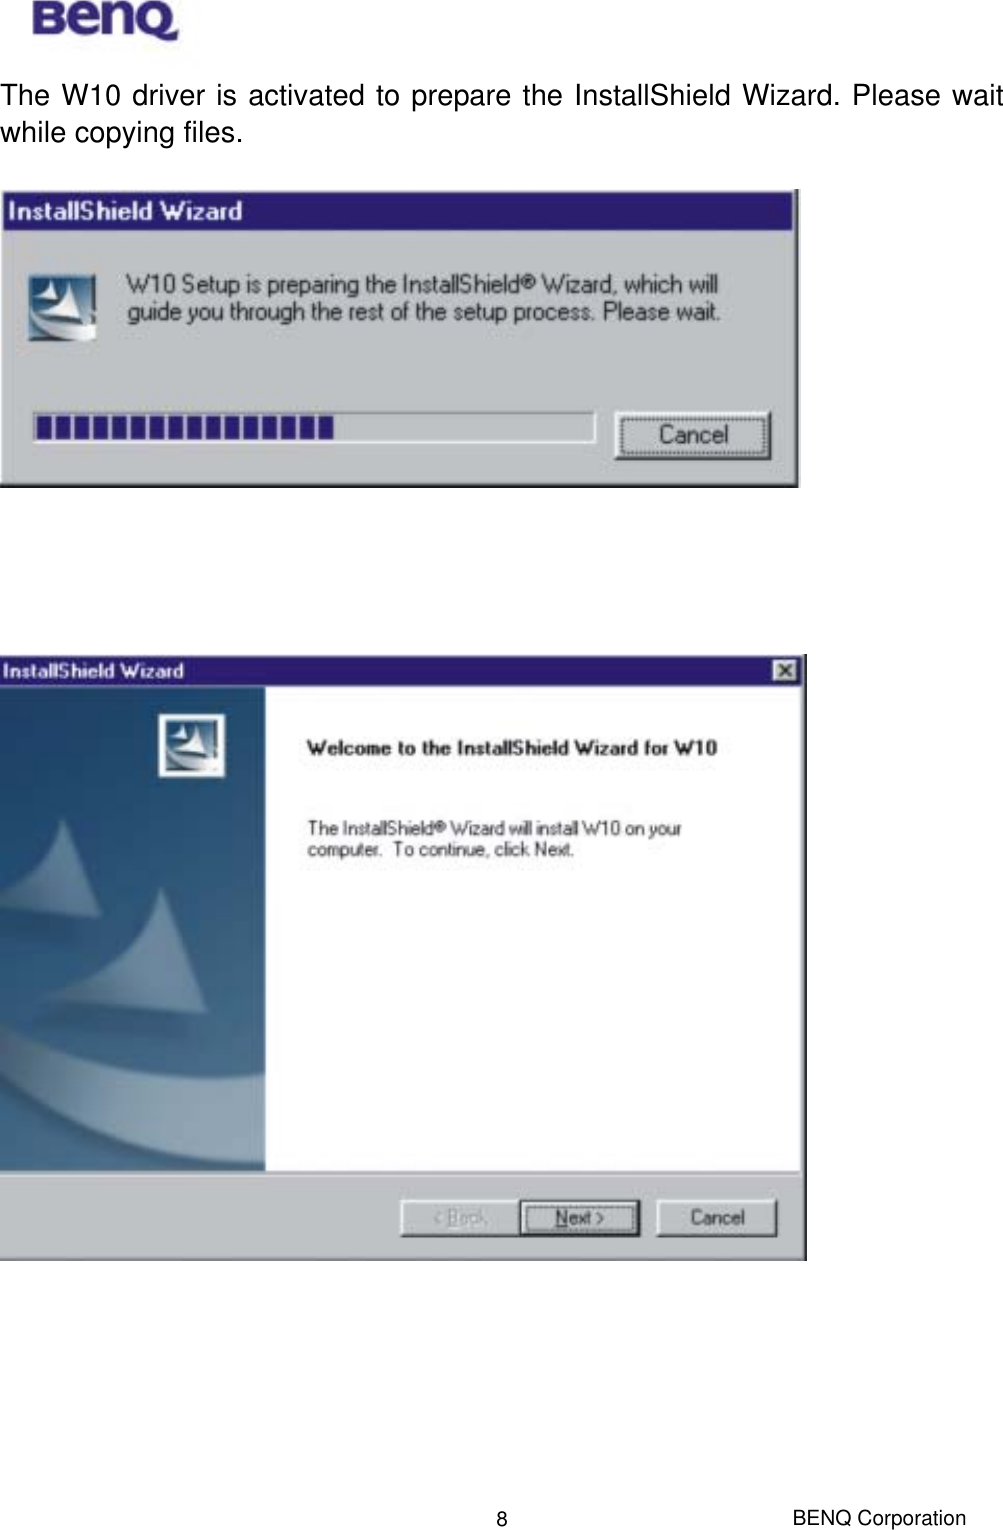  BENQ Corporation 8The W10 driver is activated to prepare the InstallShield Wizard. Please wait while copying files.              